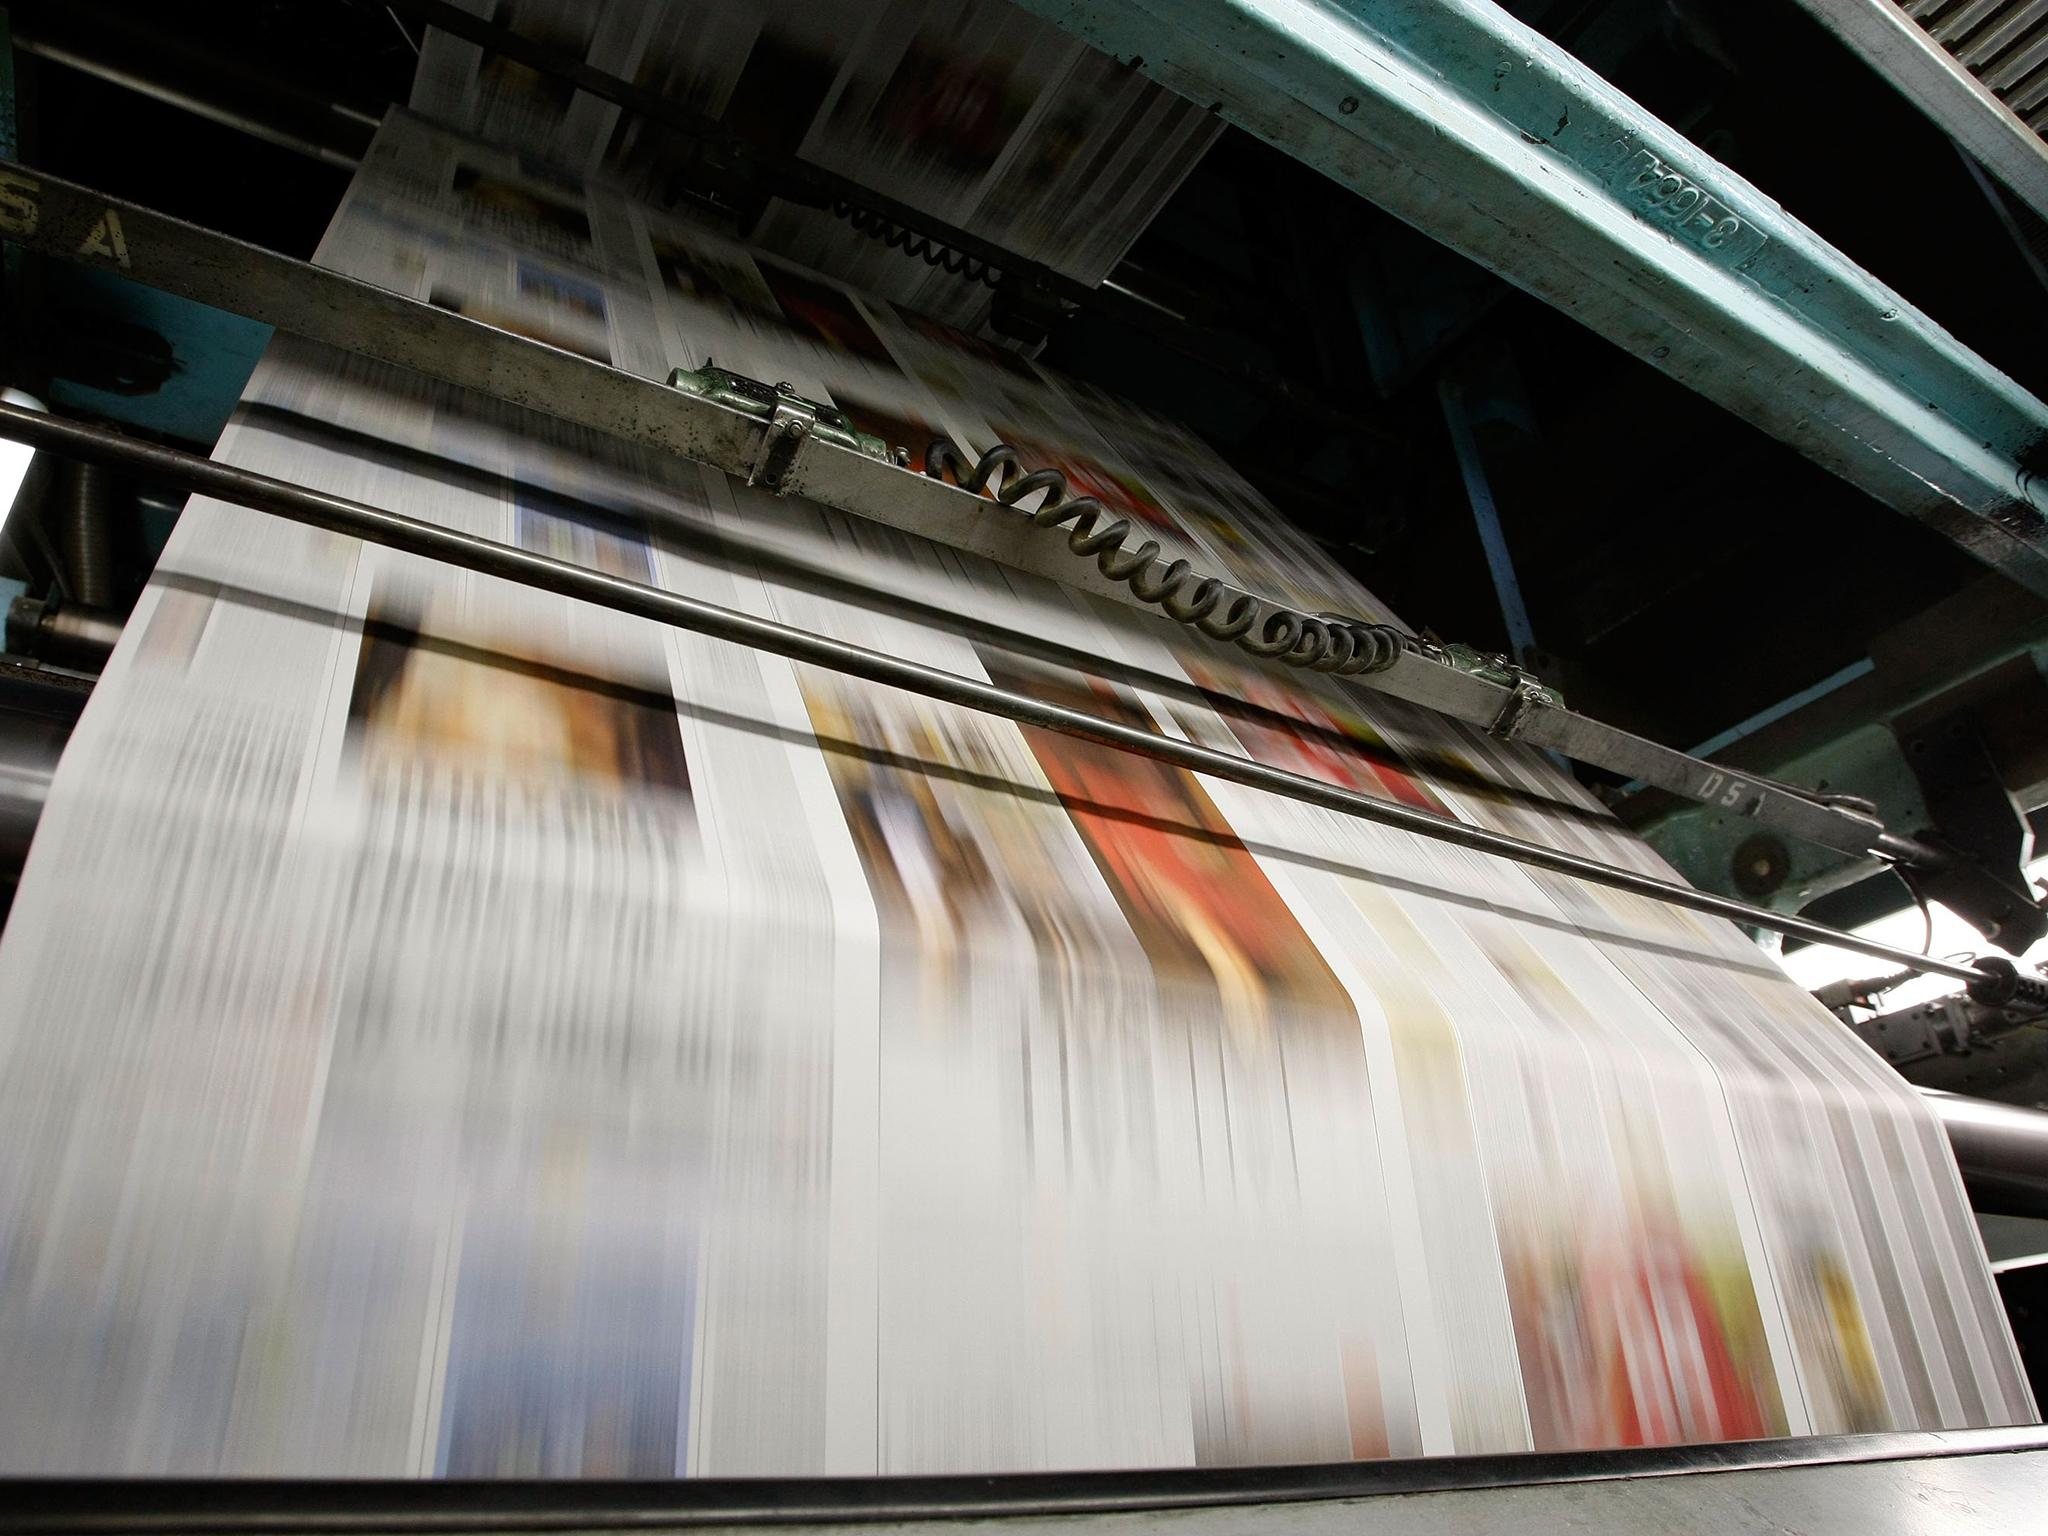 Johnston Press, which owns the i newspaper, has been hurt by a long-term decline in print advertising revenues